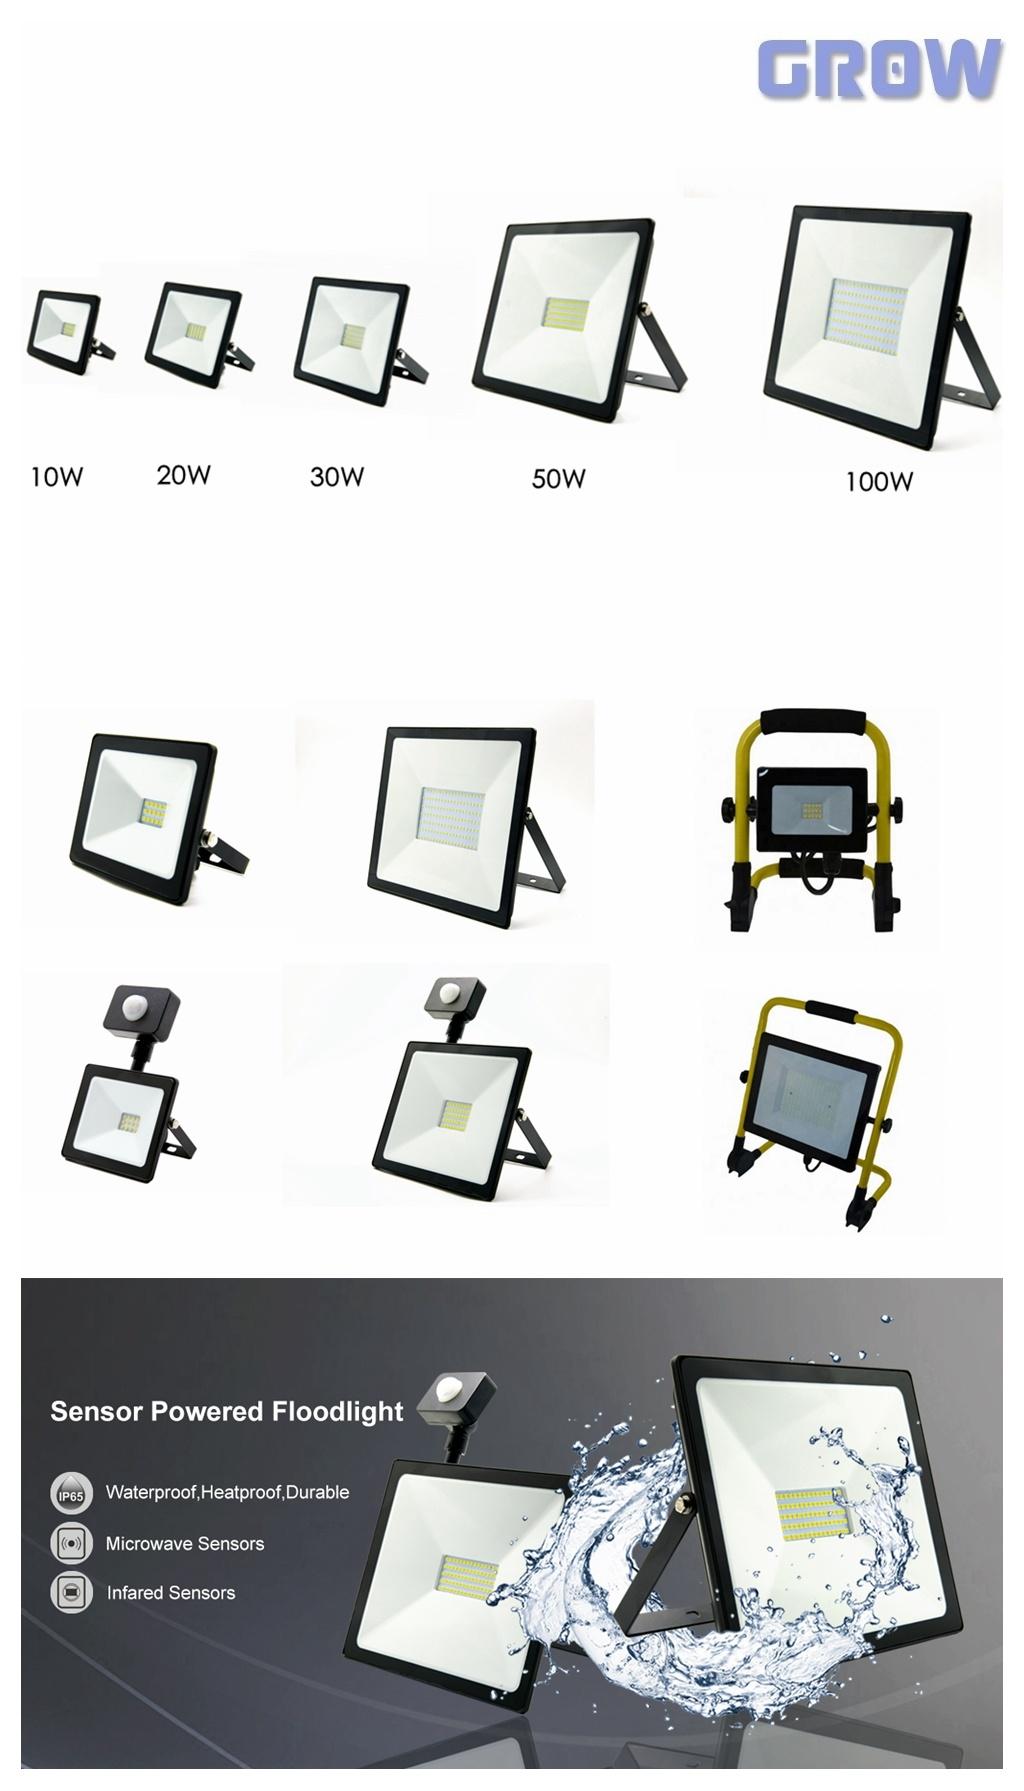 LED Flood Light Economic Type 20W Outdoor Industrial LED Light Work Camping Floodlight Lamp IP65 Waterproof with Good Price and High Quality with CE RoHS ERP